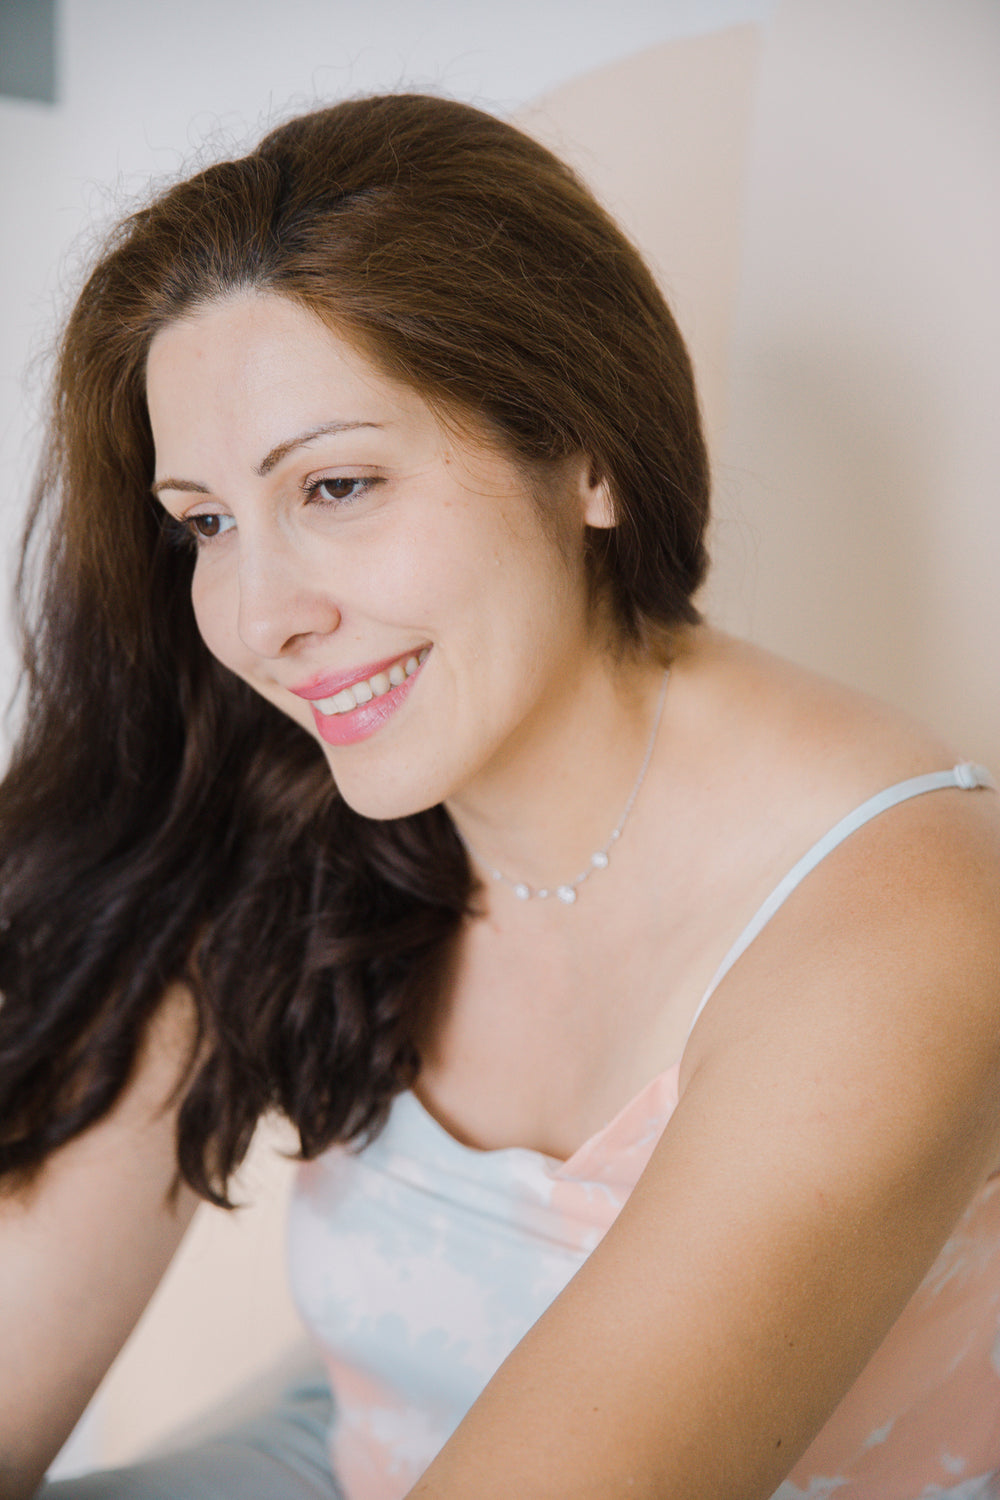 portrait of person with long brown hair smiling in white